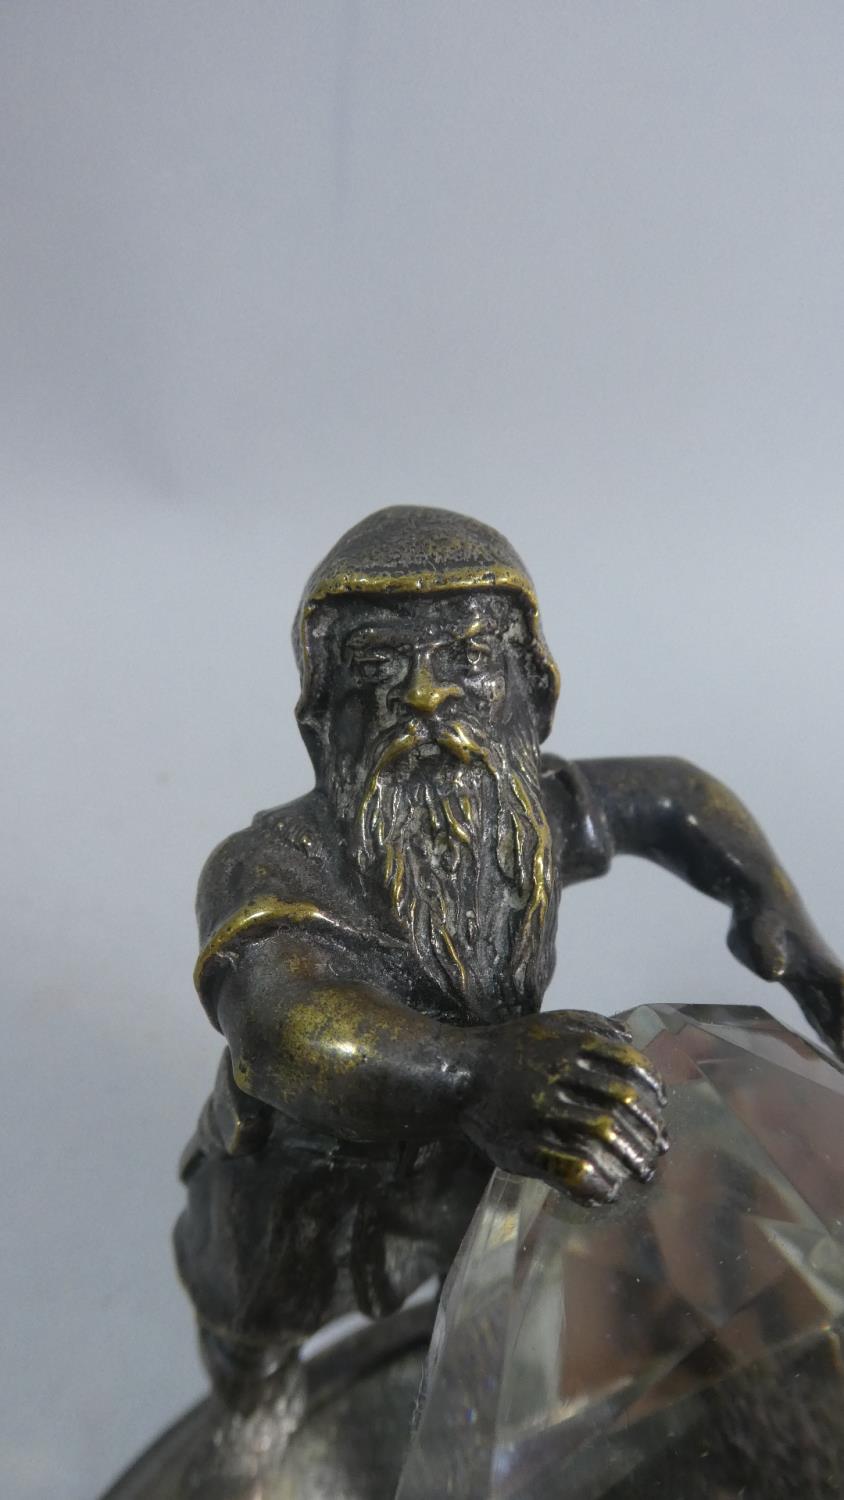 A Novelty Desktop Paperweight in the Form of Dwarf Holding Giant Glass Diamond, Silver Plated - Image 2 of 2